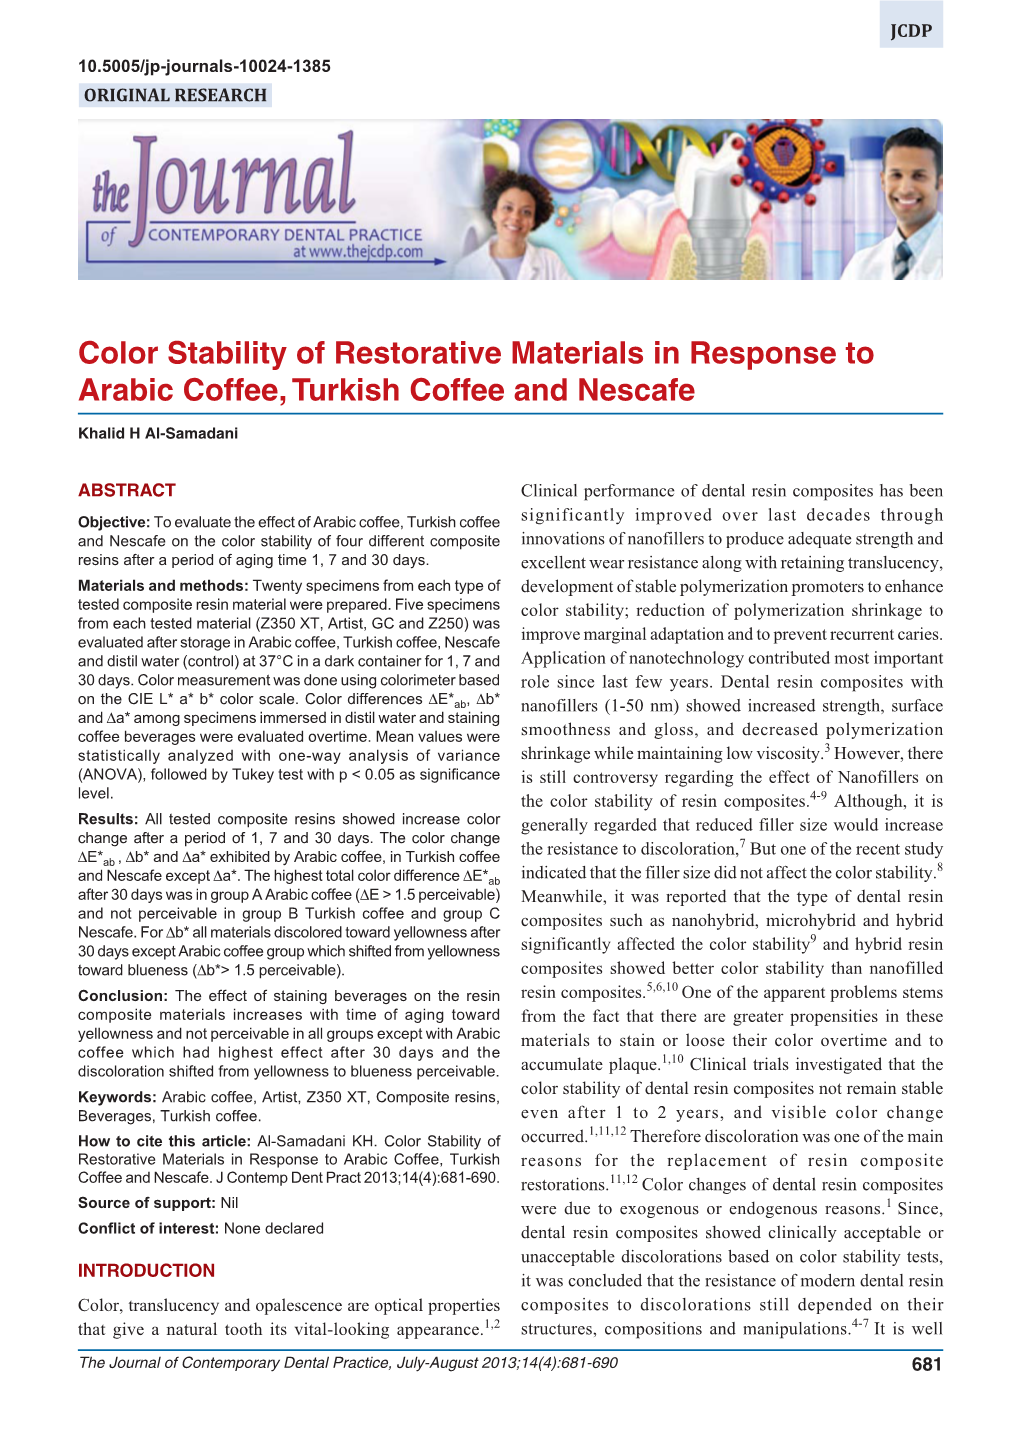 Color Stability of Restorative Materials in Response to Arabic Coffee, Turkish Coffee and Nescafe